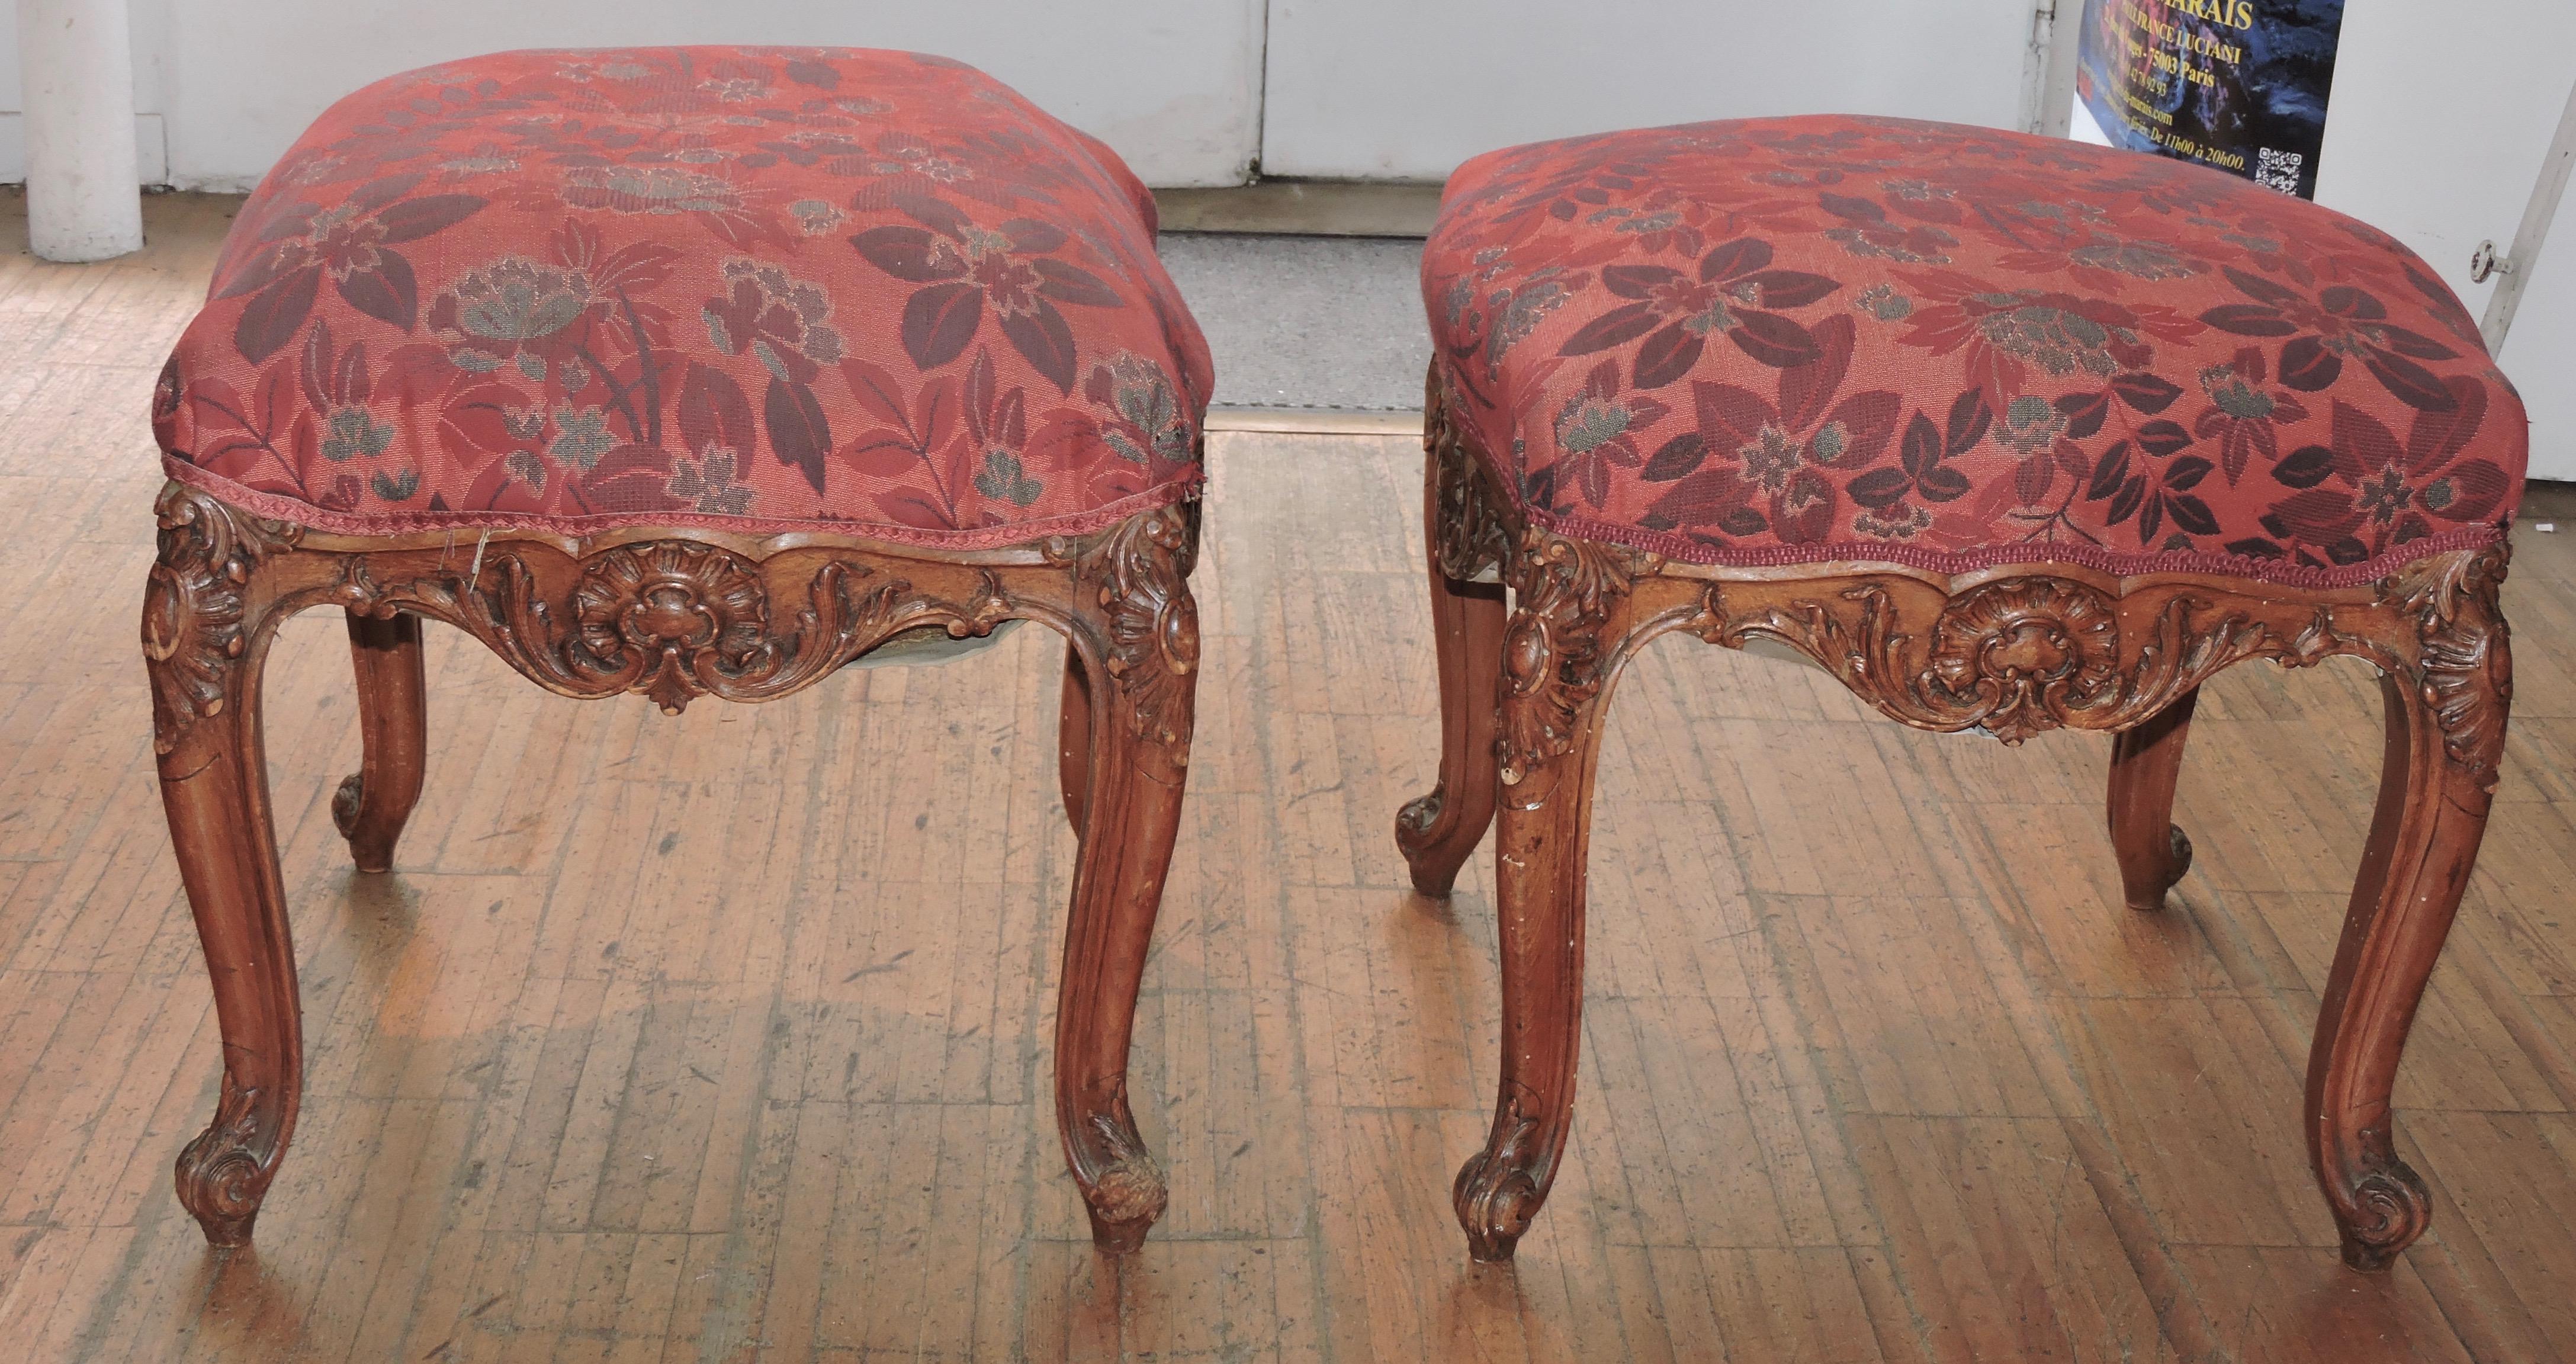 Pair of 19th century Louis XV style square stools
Four feet carved with shells, flowers and acanthus leaves,
circa 1890.